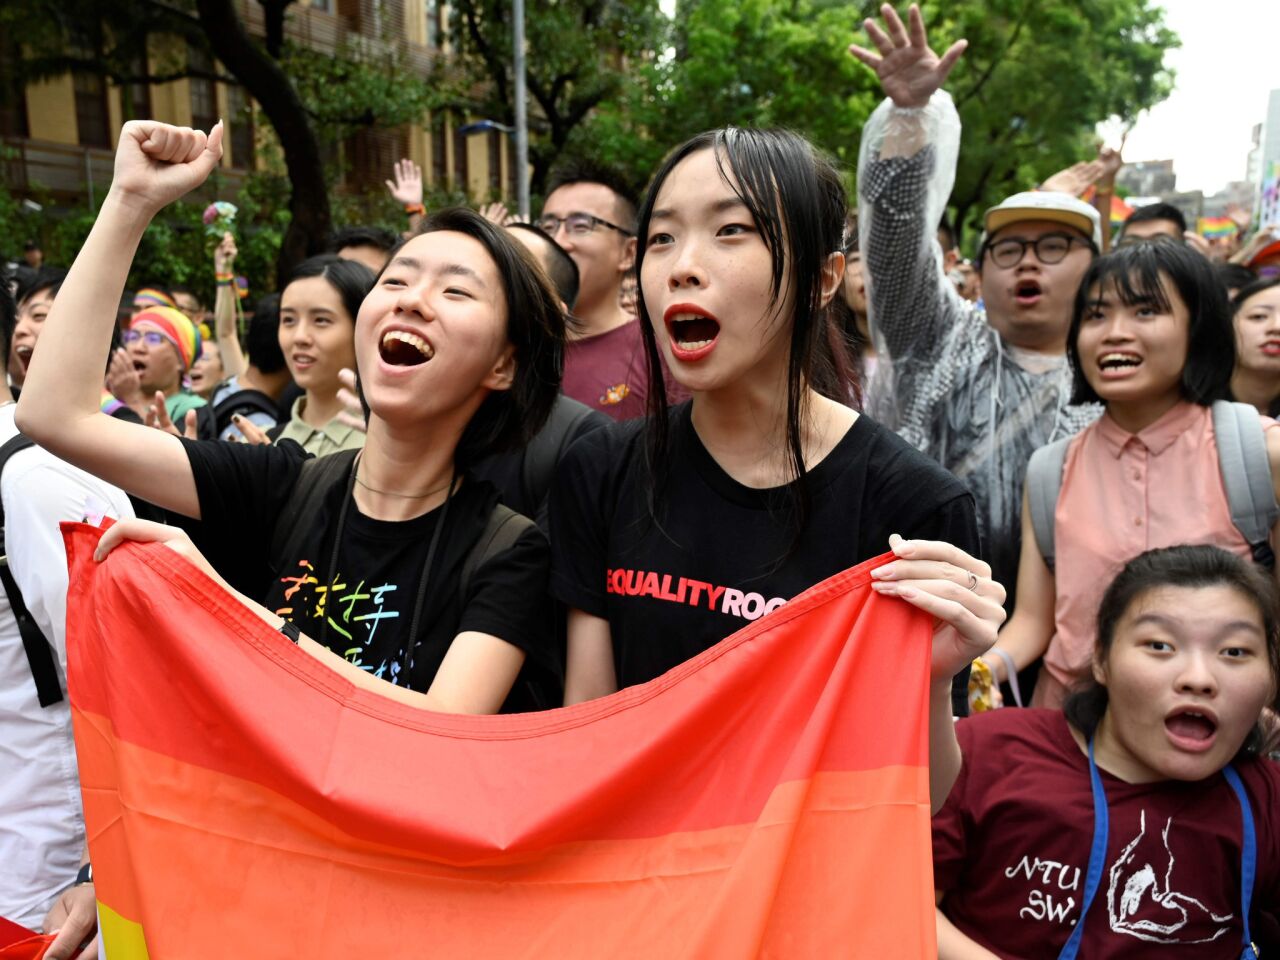 Supporters of same-sex marriage celebrate outside the parliament in Taipei, Taiwan.